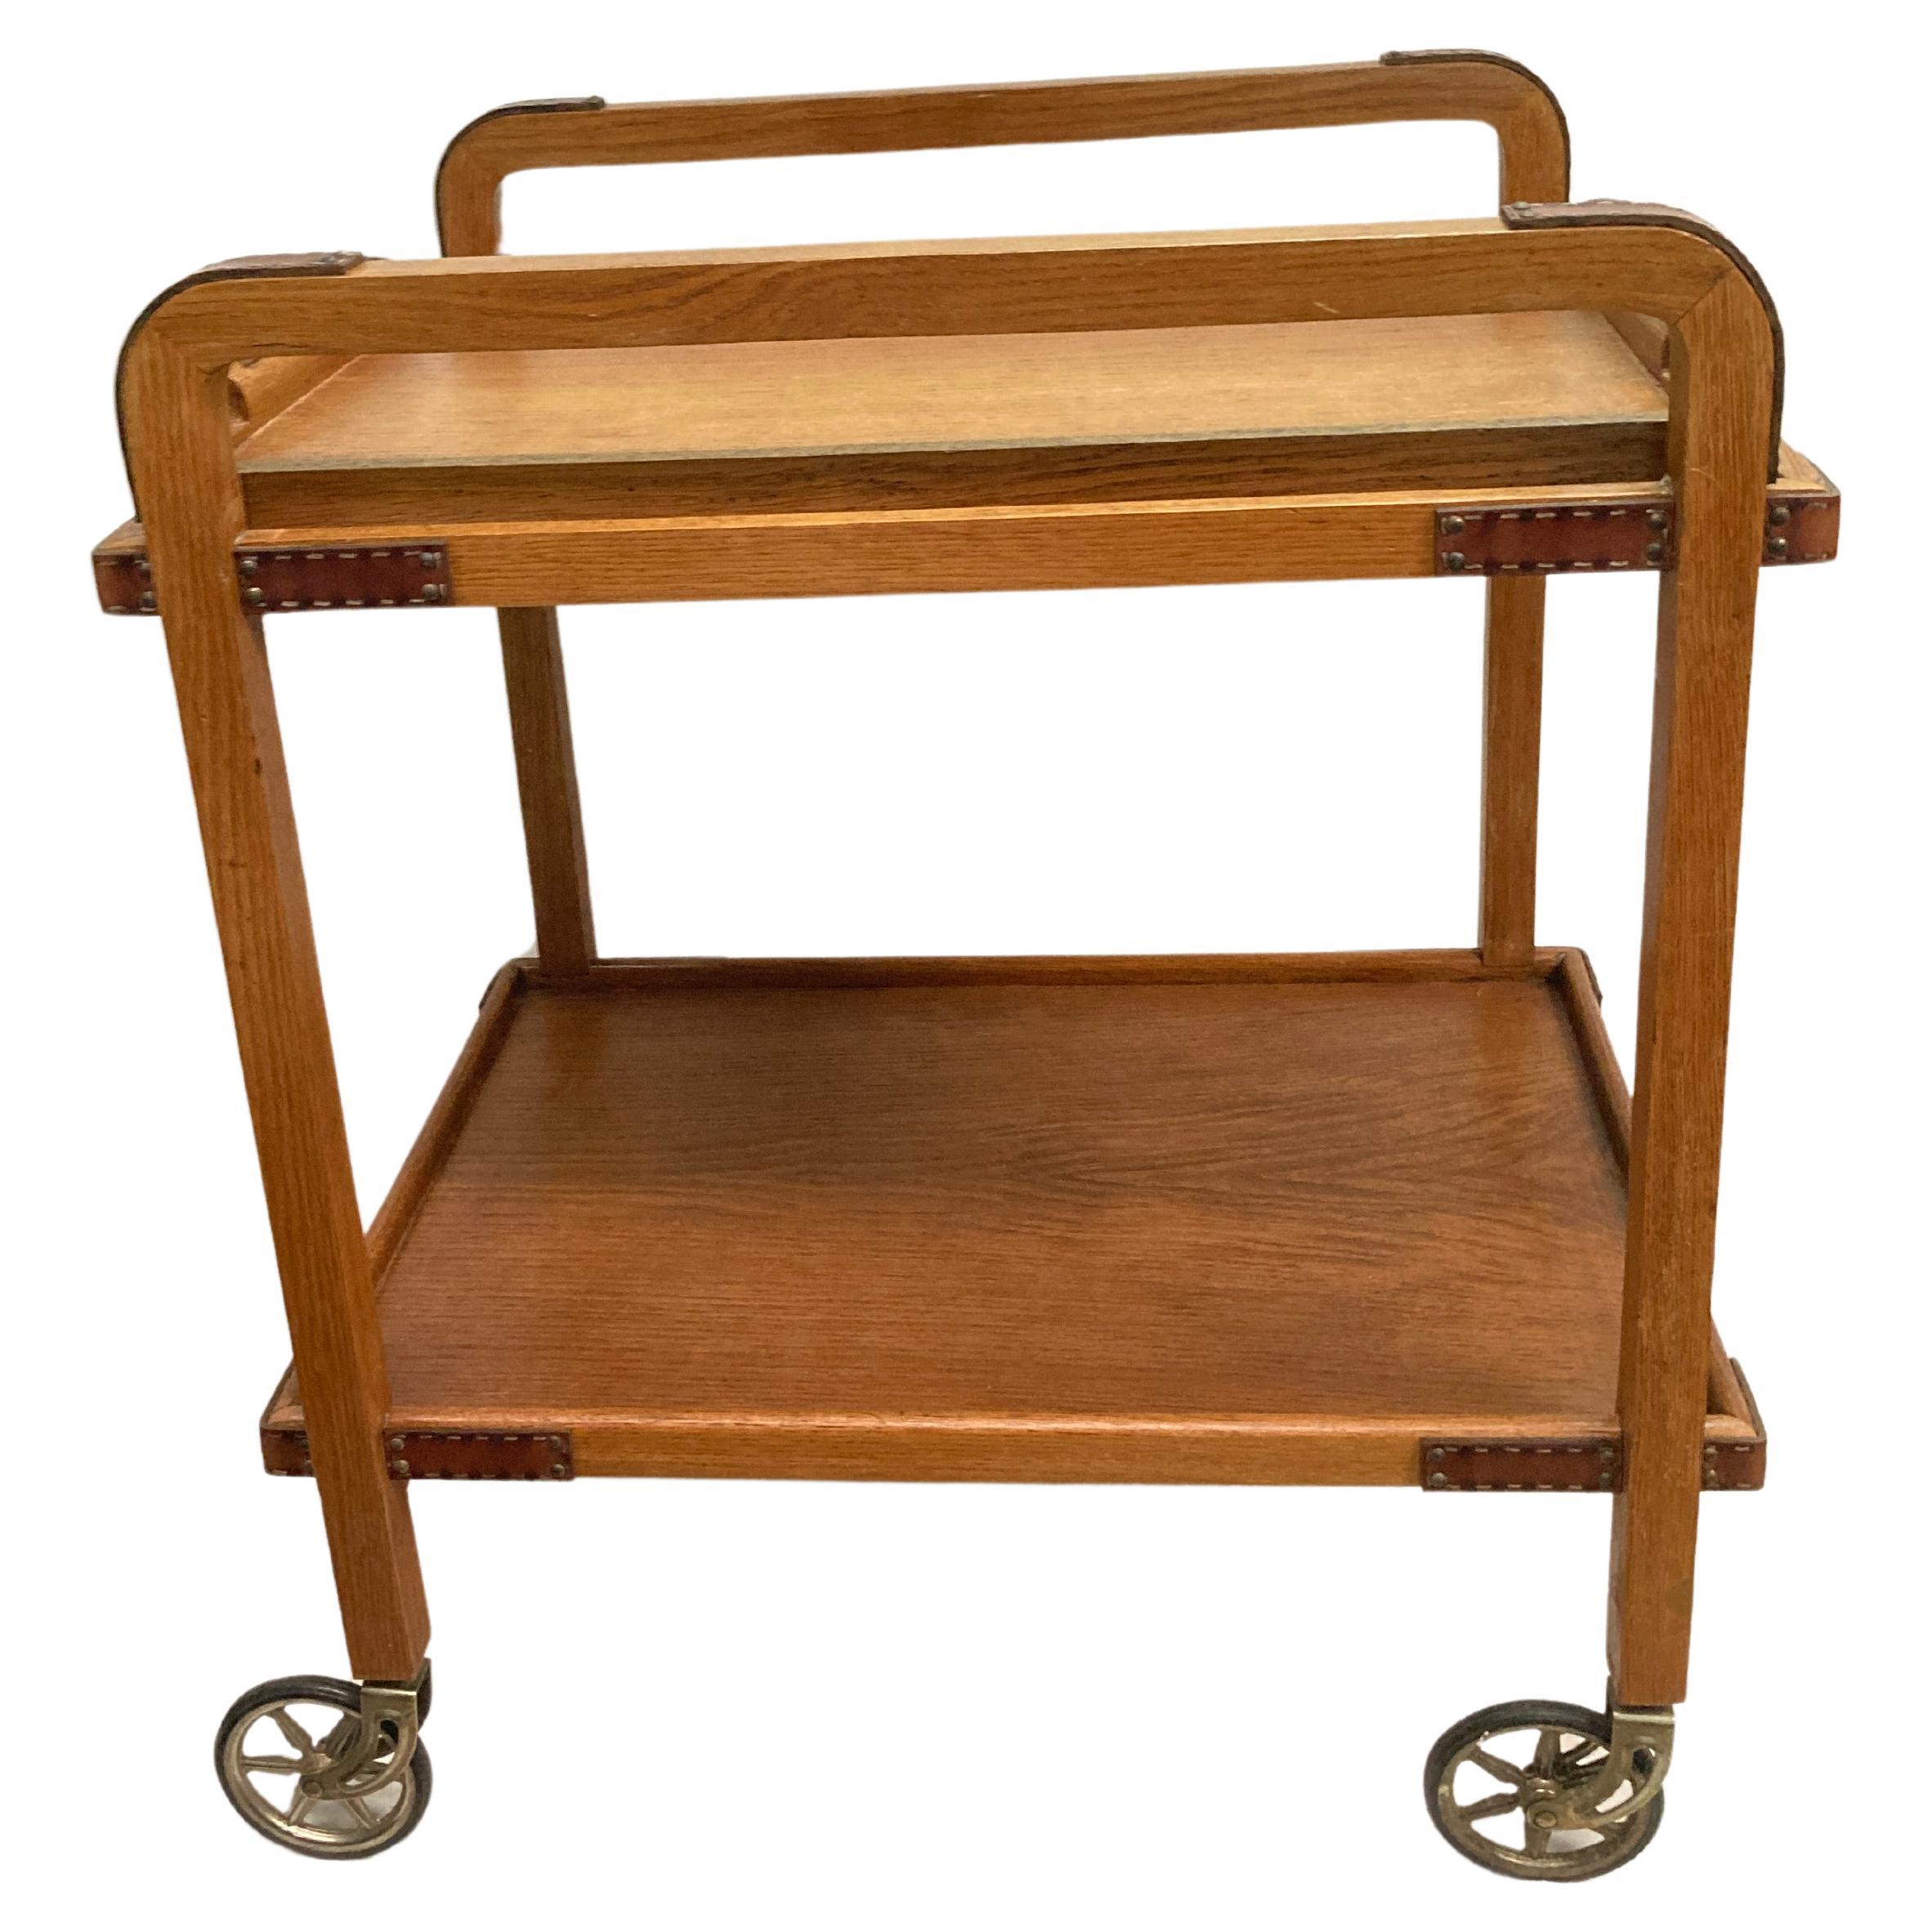 1950's Stitched leather and oak bar cart by Jacques Adnet